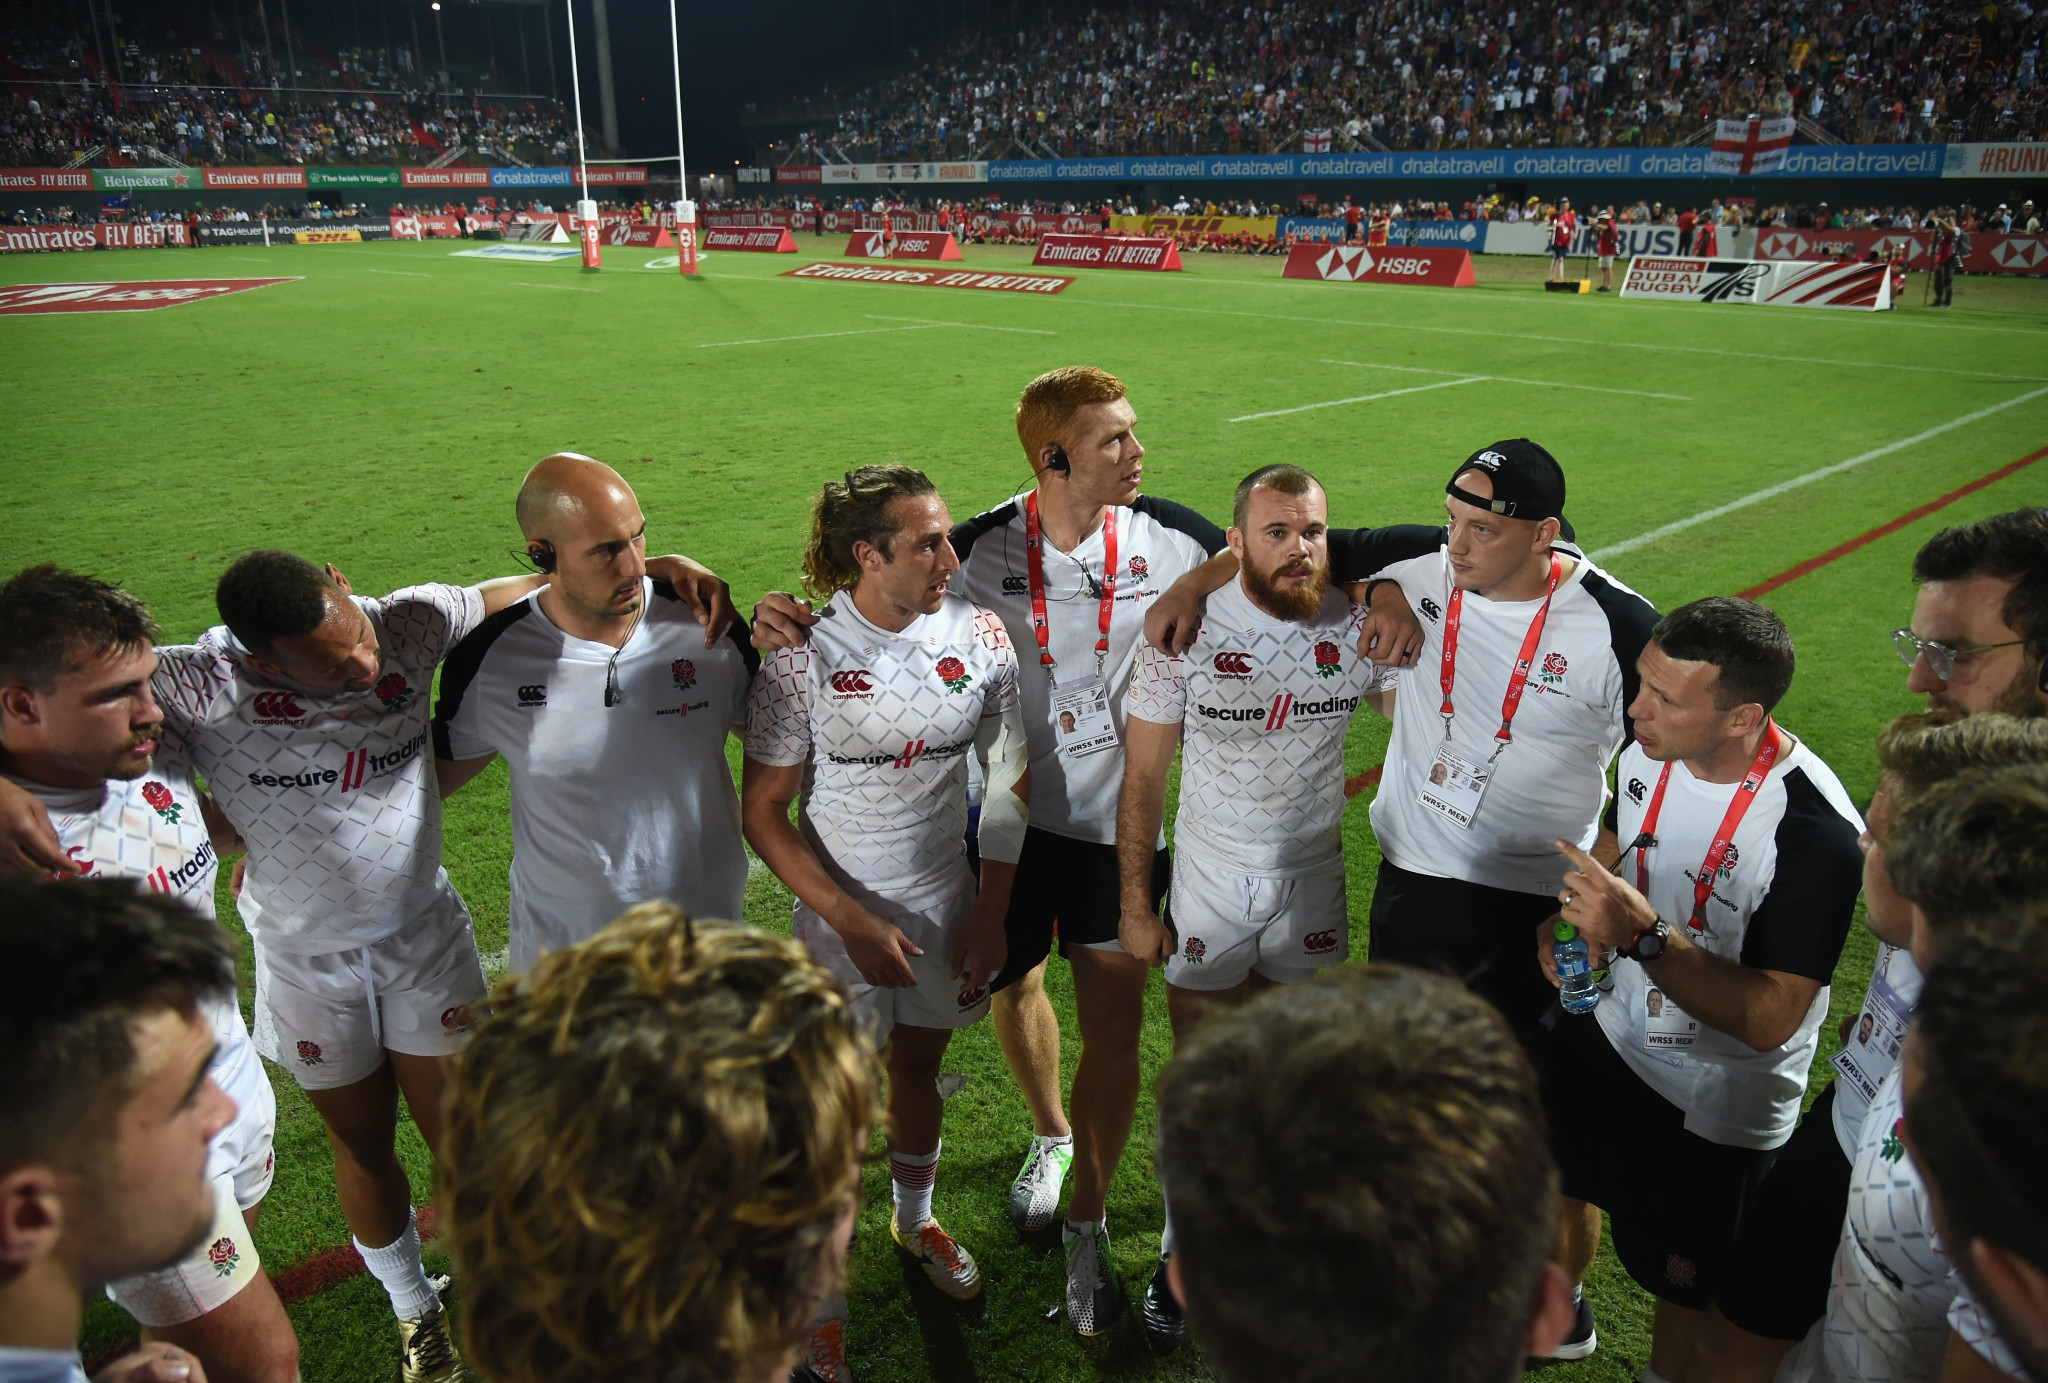 Amor coached the England men's team to victory in their Olympic qualifier ©Getty Images